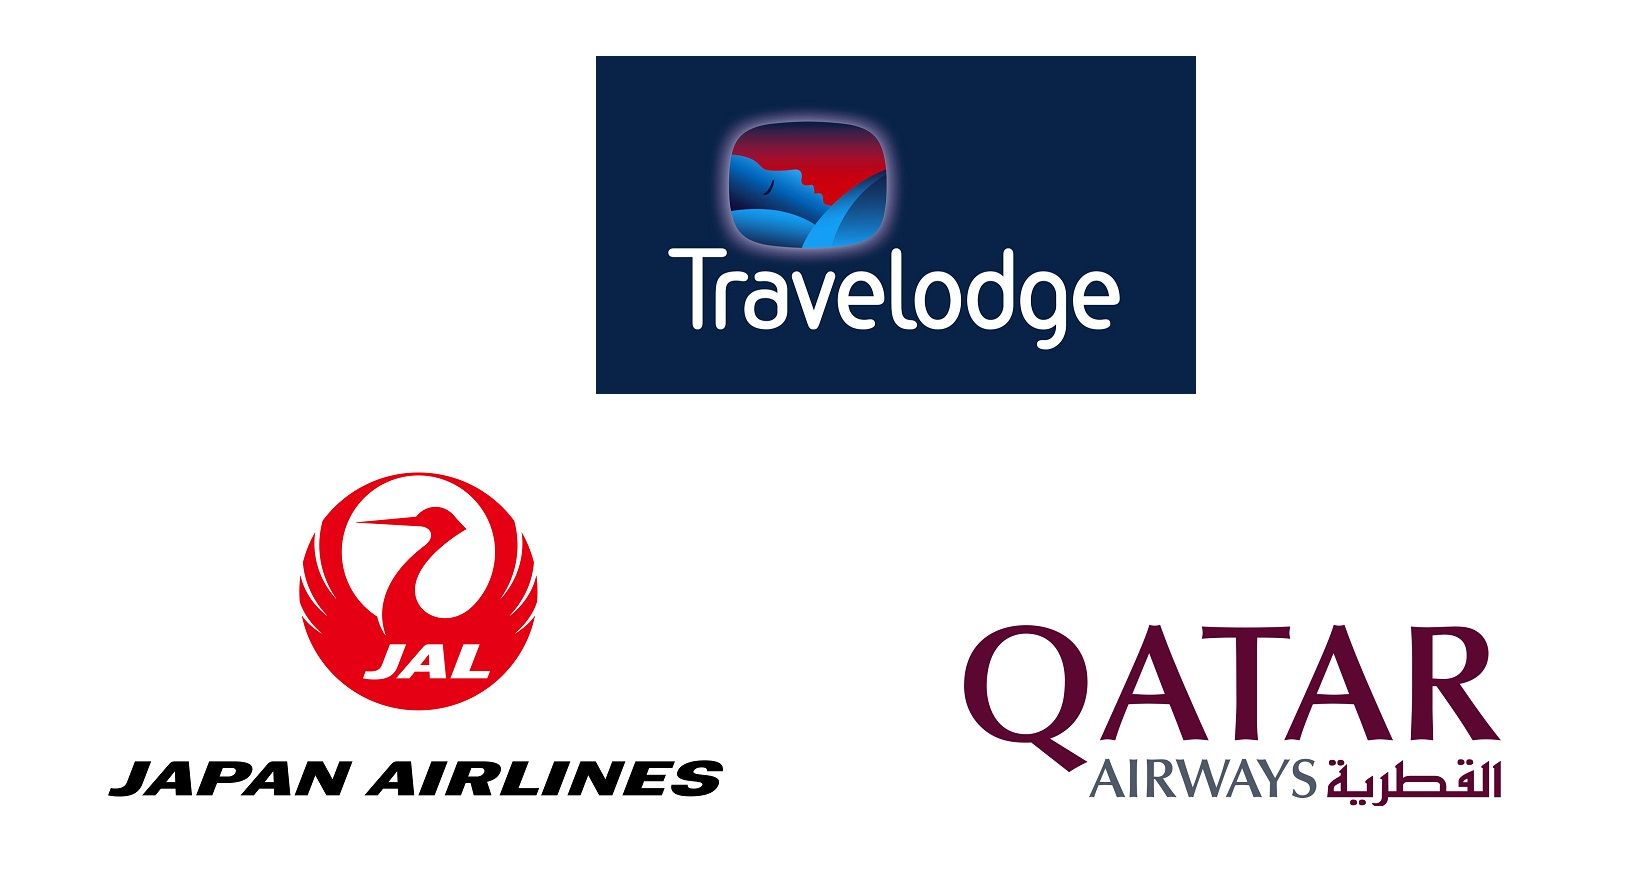 Travelodge, Qatar Airways and Japan Airlines Logos